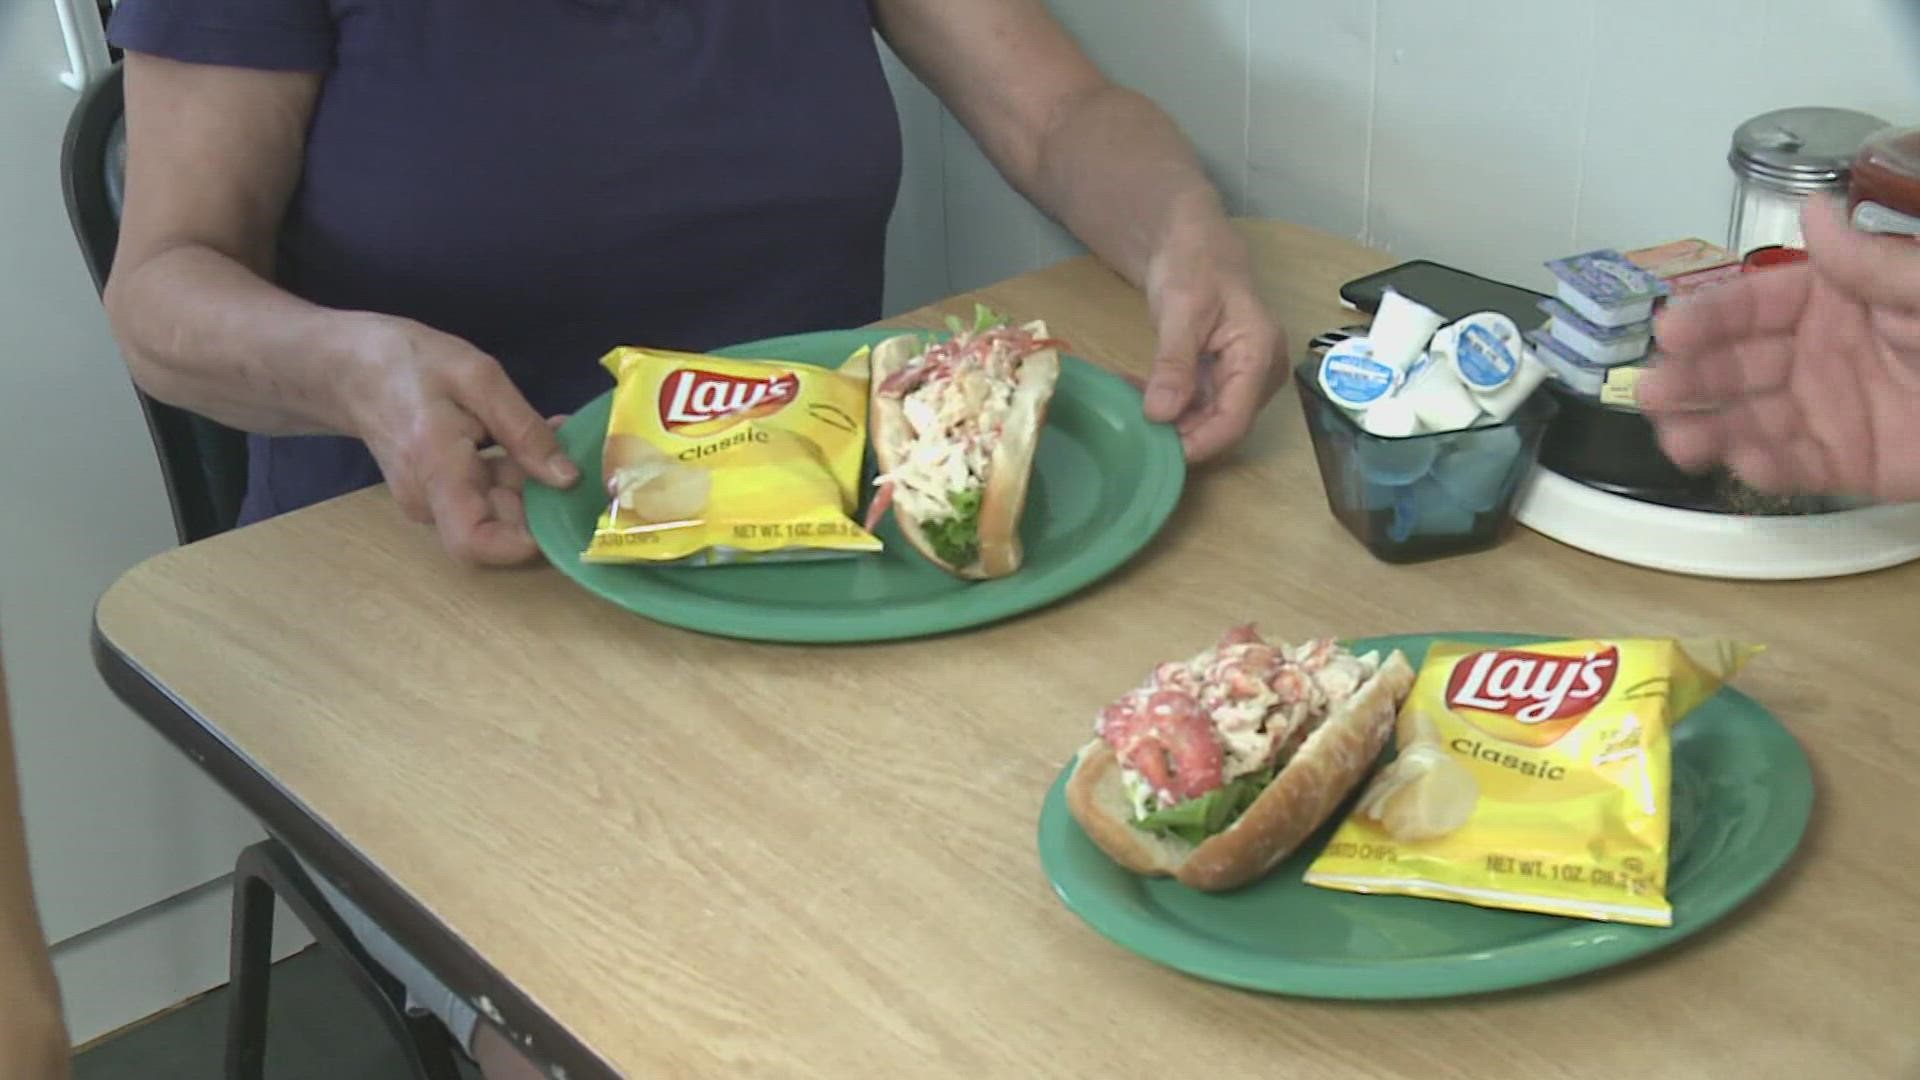 Deb Thibault of Deb's Bristol Diner hopes to help her community by offering lobster rolls for $14.99 for a limited time.